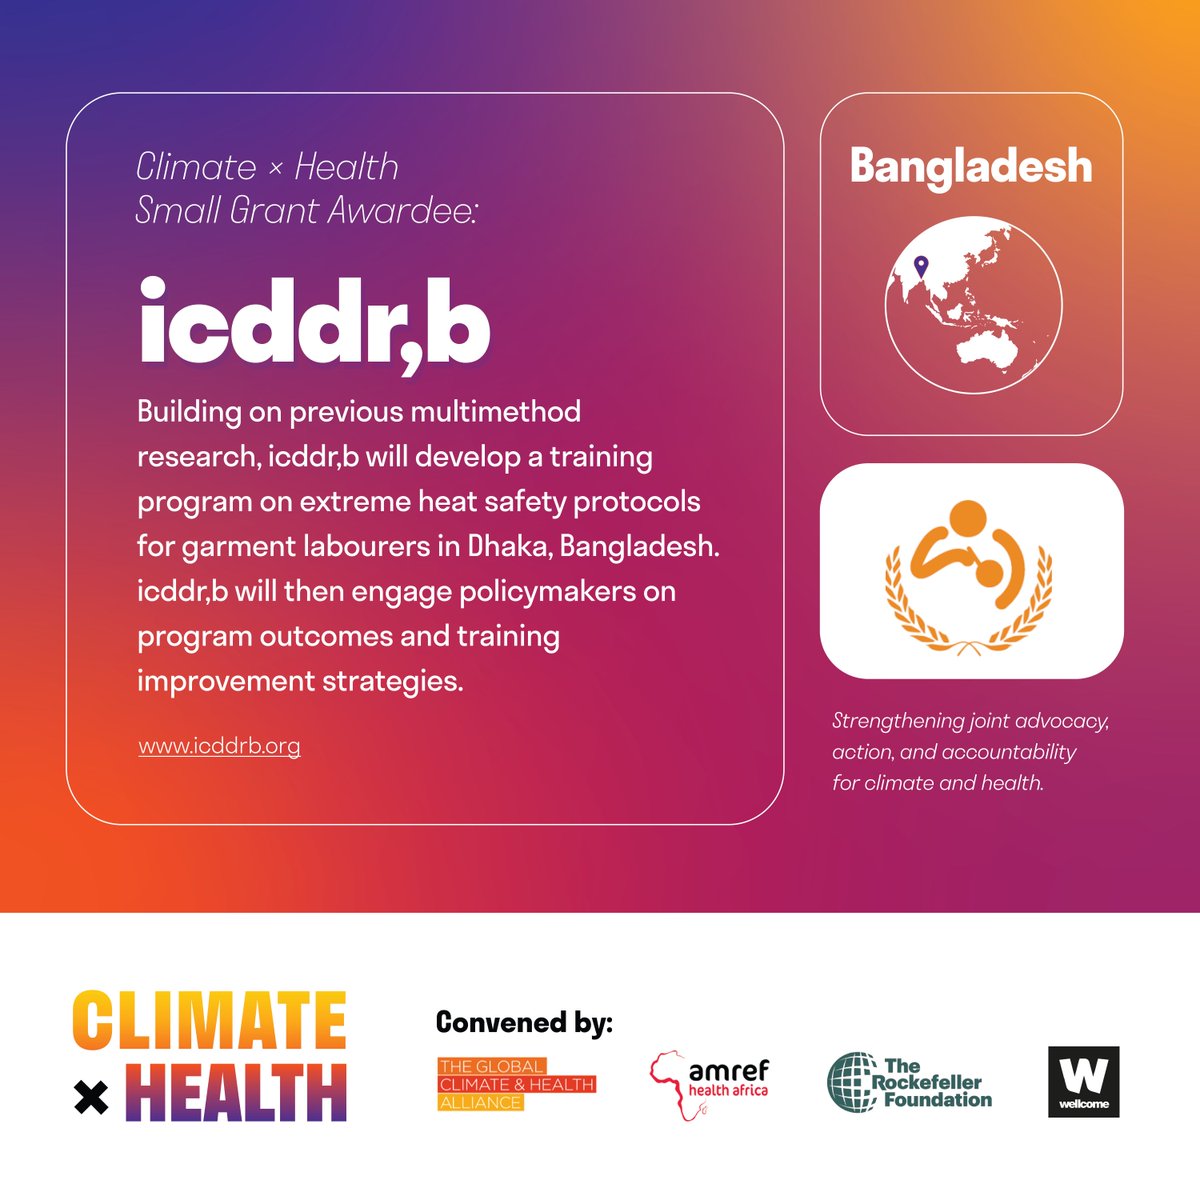 .@icddr_b has been selected to receive a Climate x Health small grant for their work developing evidence-based trainings to improve labor conditions in extreme heat. Learn more about their project here: climatexhealth.org/small-grants